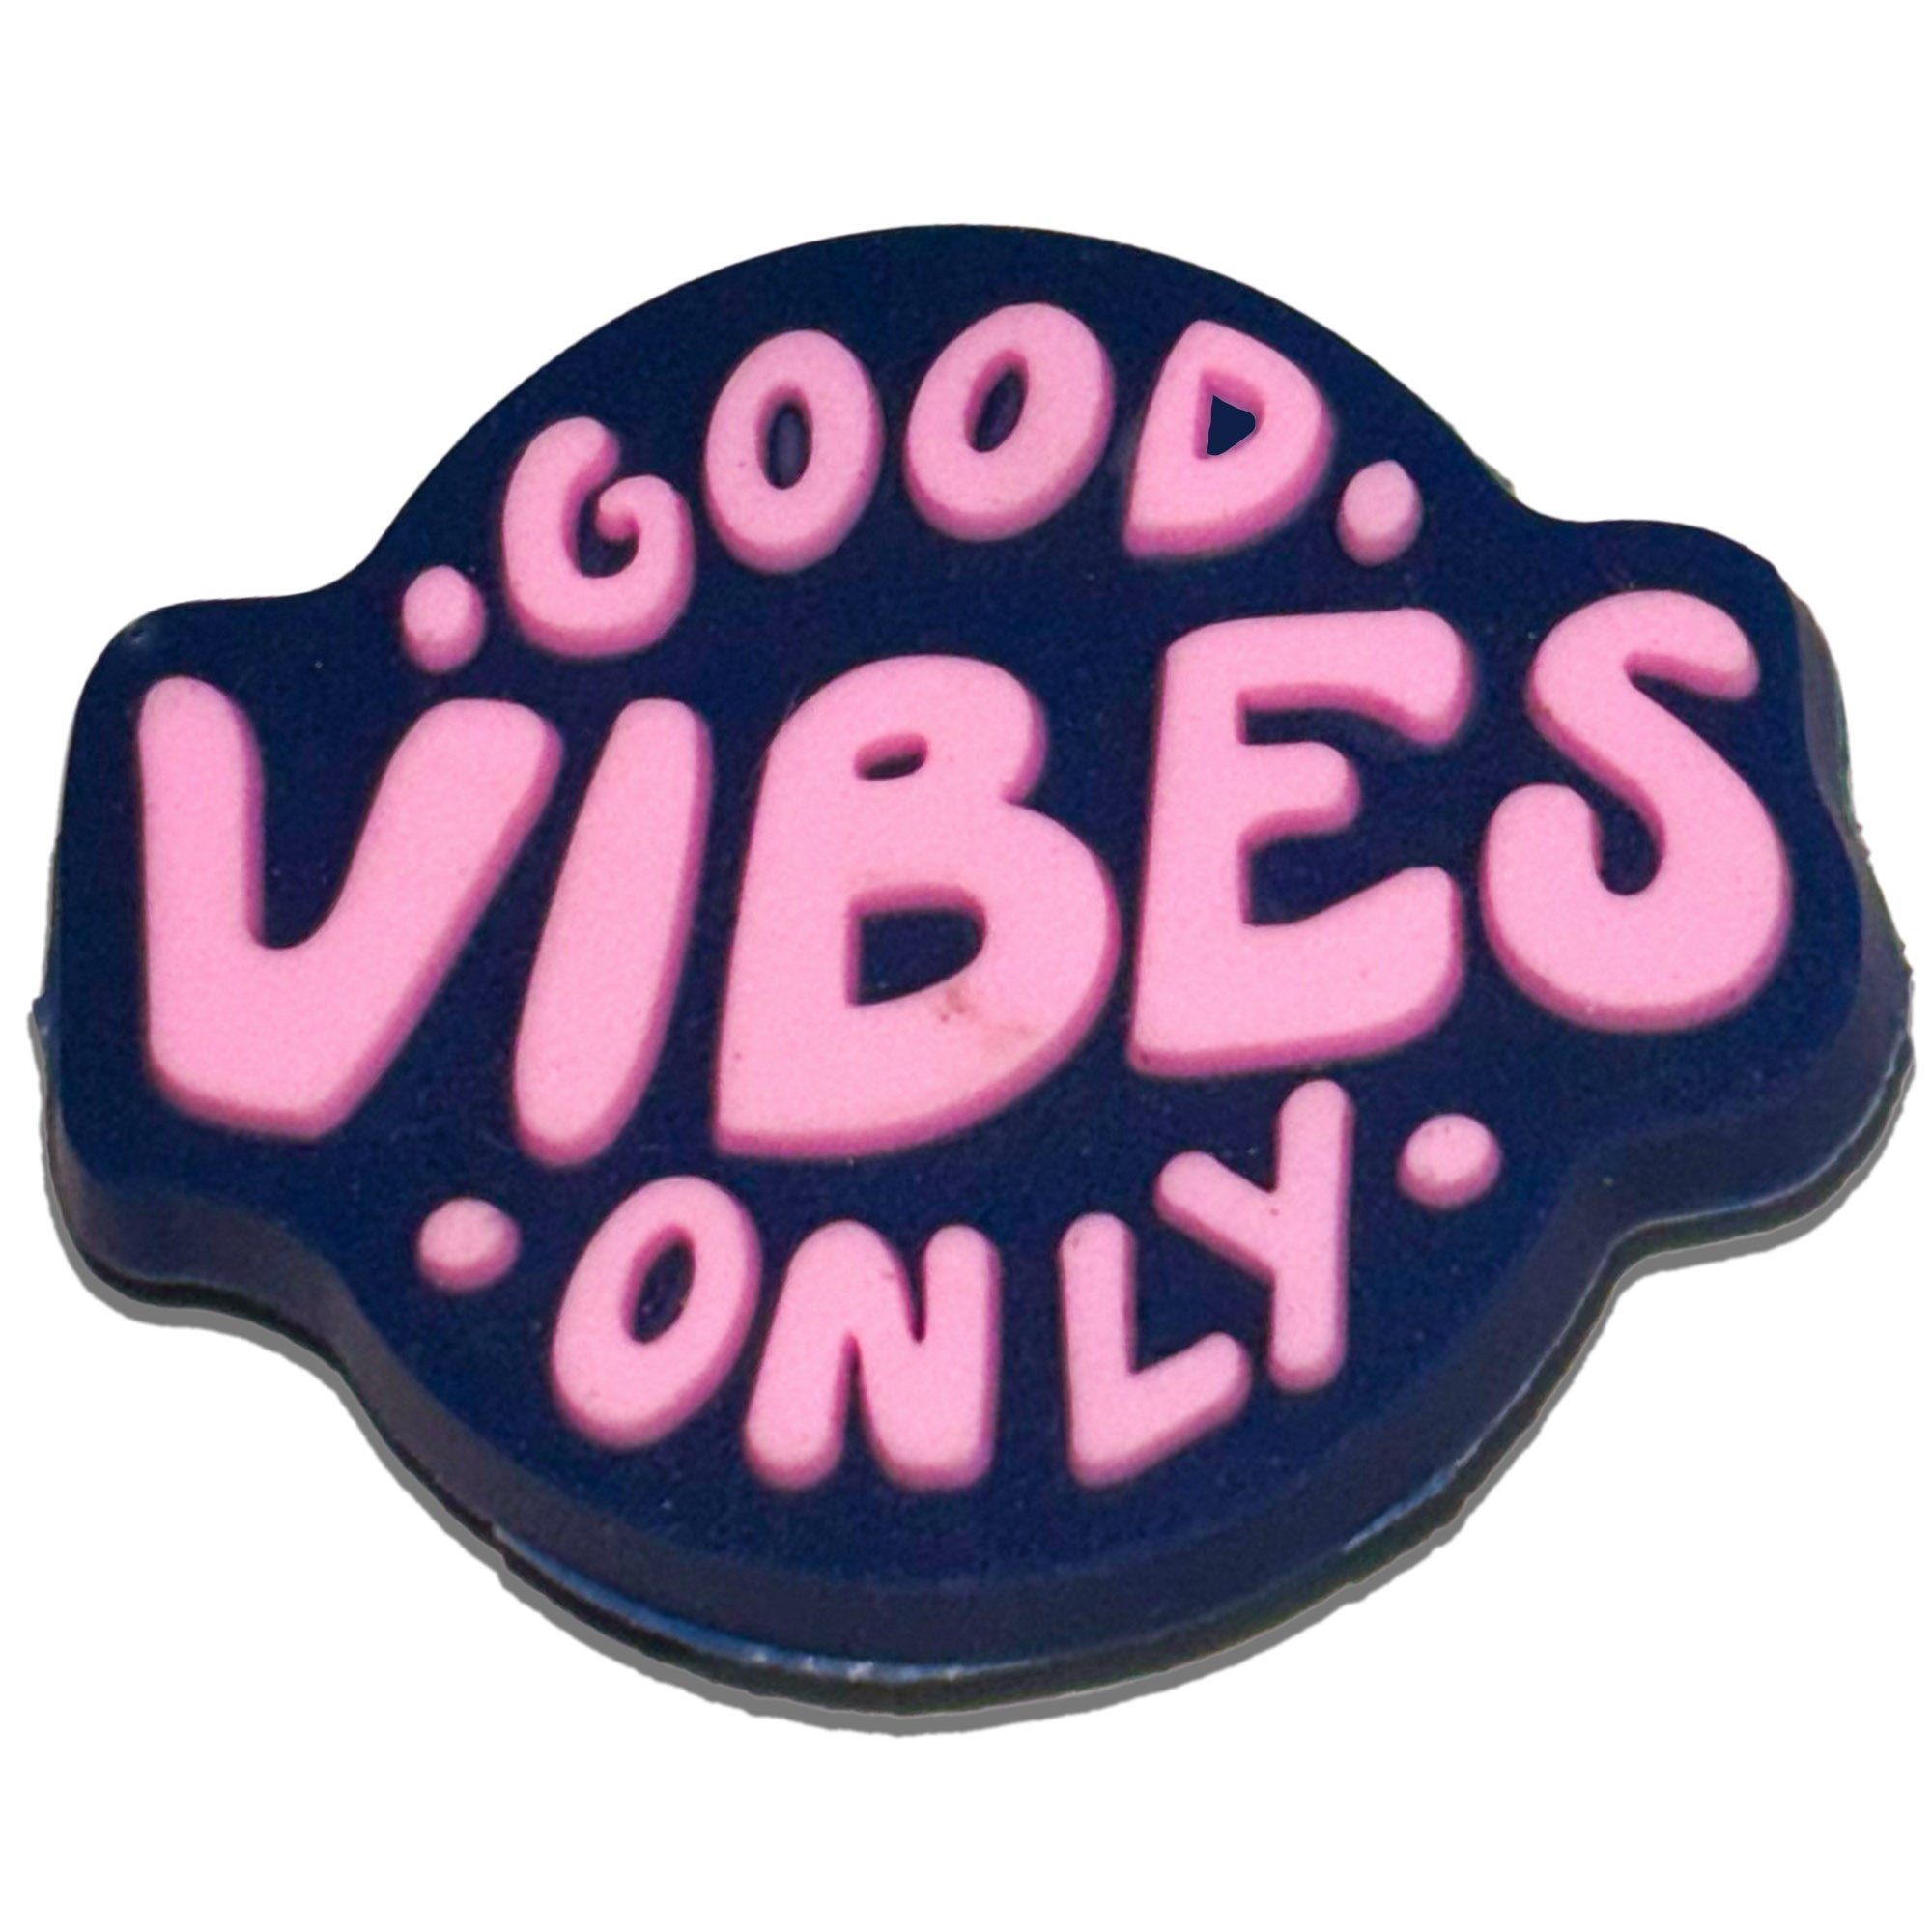 "Good Vibes Only" :Shoe Charm - Questsole